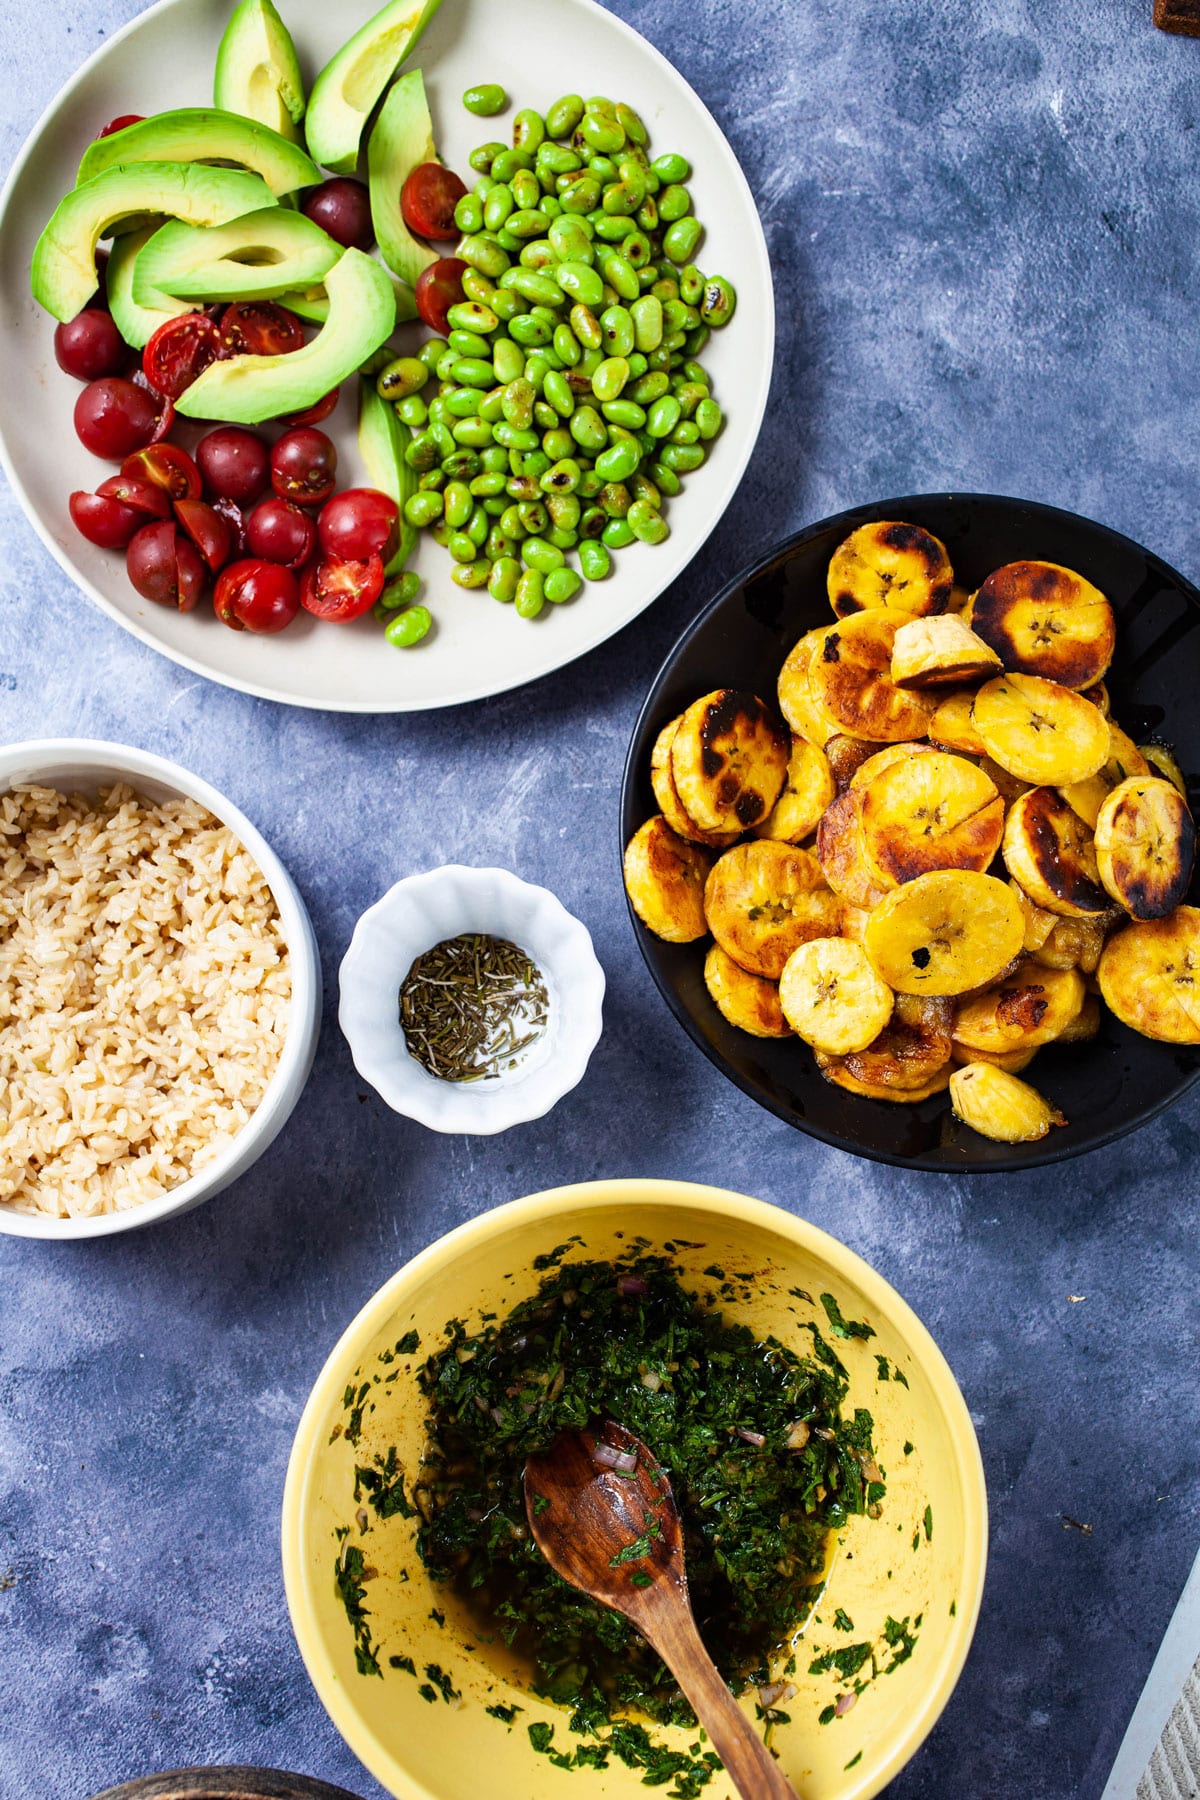 Cooked rice, tomatoes, sliced avocado, fried edamame beans, fried plantains, chimichurri sauce, and seasoning displayed on a table.